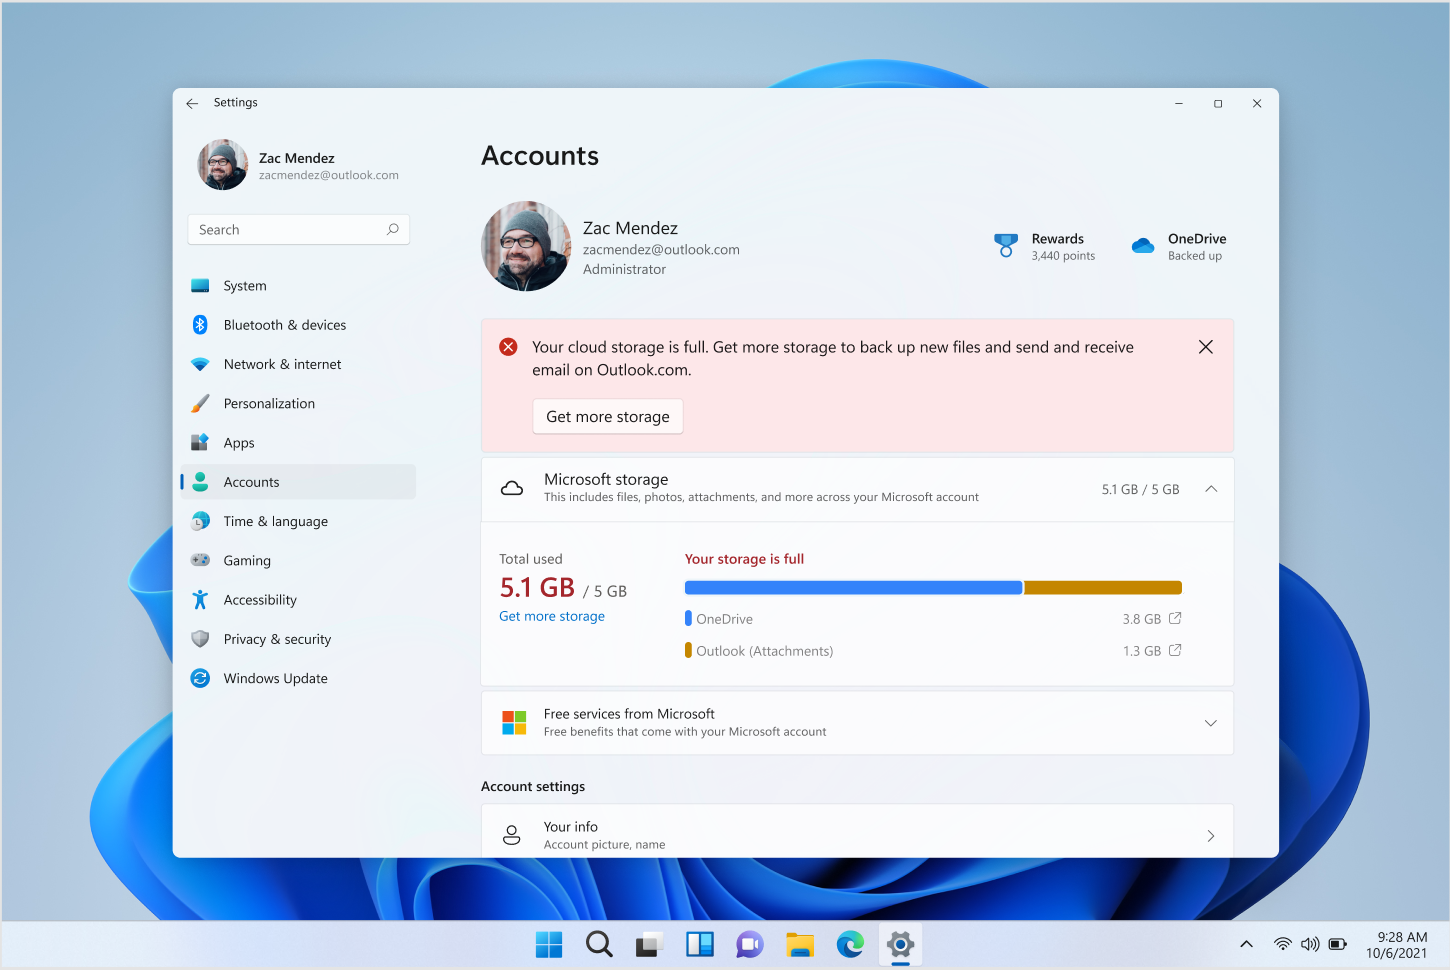 Screenshot of the Windows 11 Settings app showing updating cloud storage information for a linked Microsoft account, including OneDrive storage and Outlook attachments